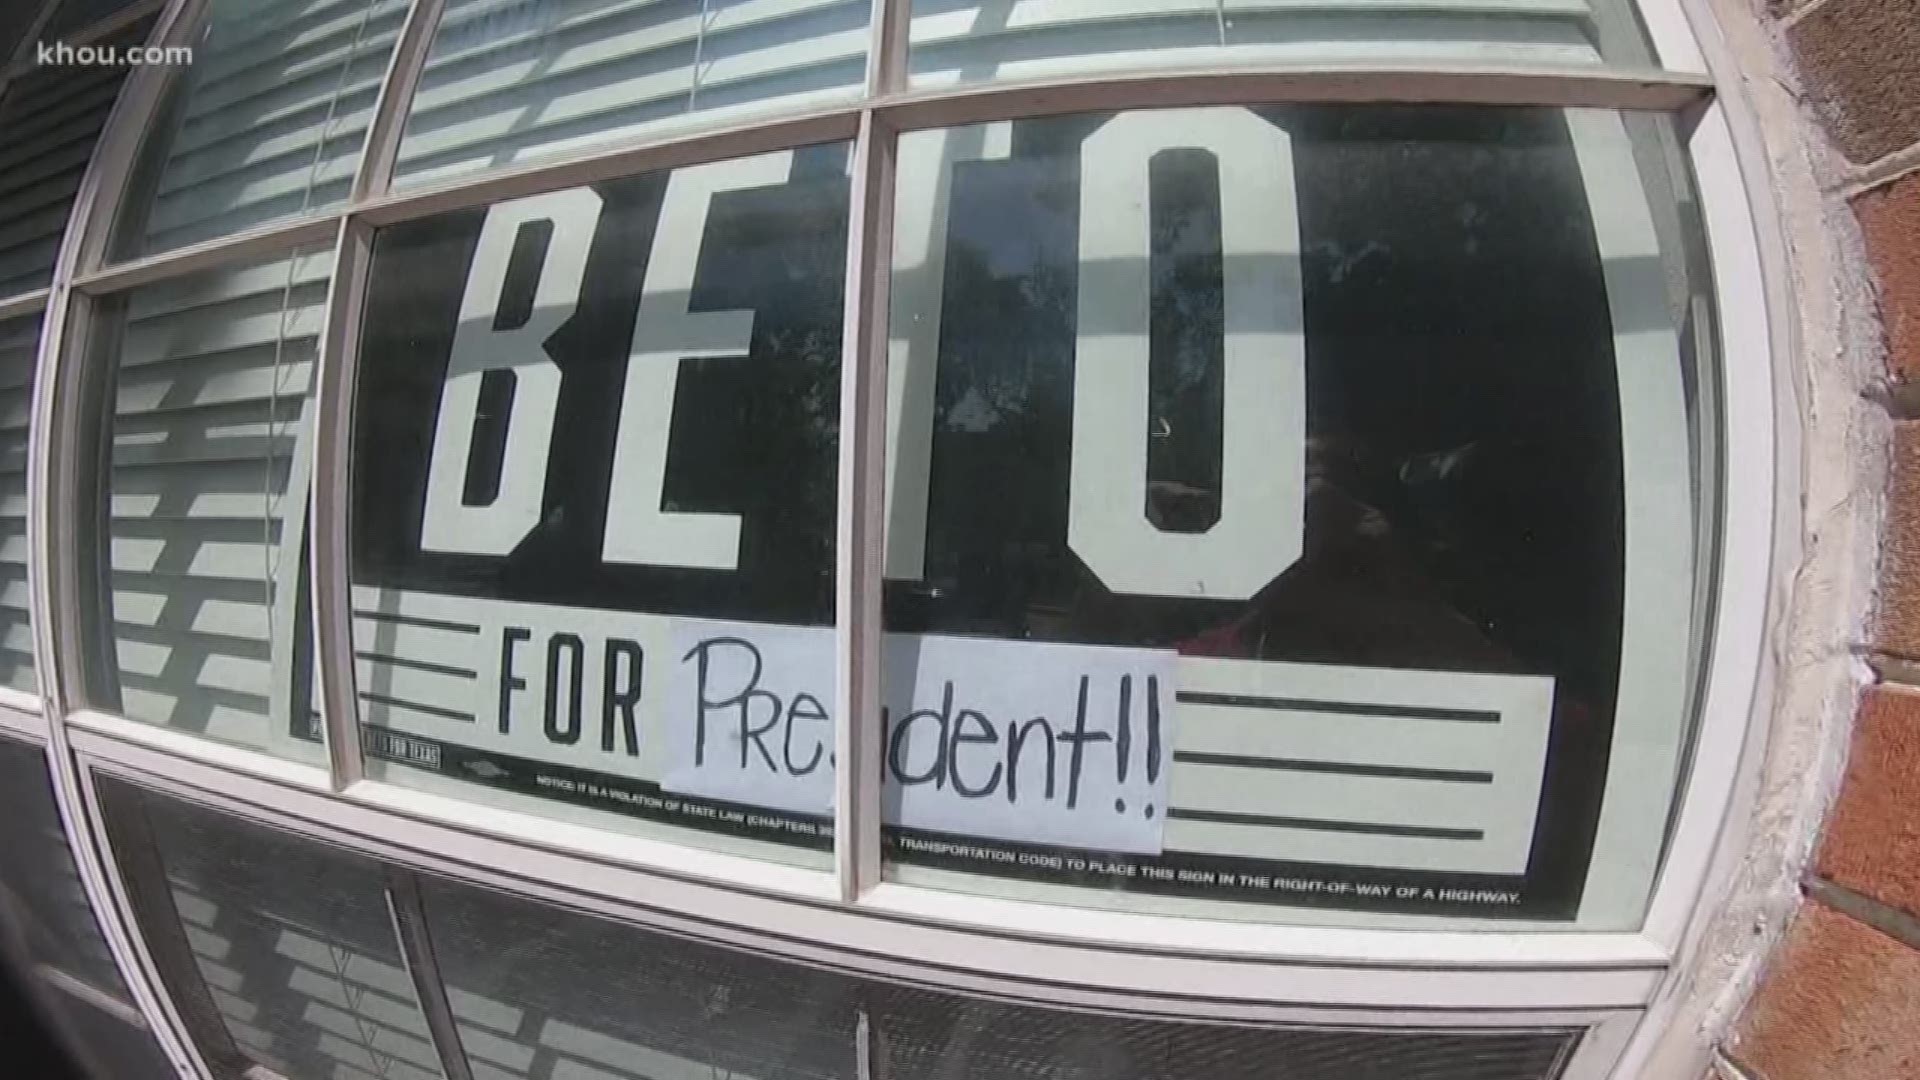 A supporter of Beto O'Rourke reached out to us because his apartment complex told him to remove a campaign sign in his window. But is that legal?